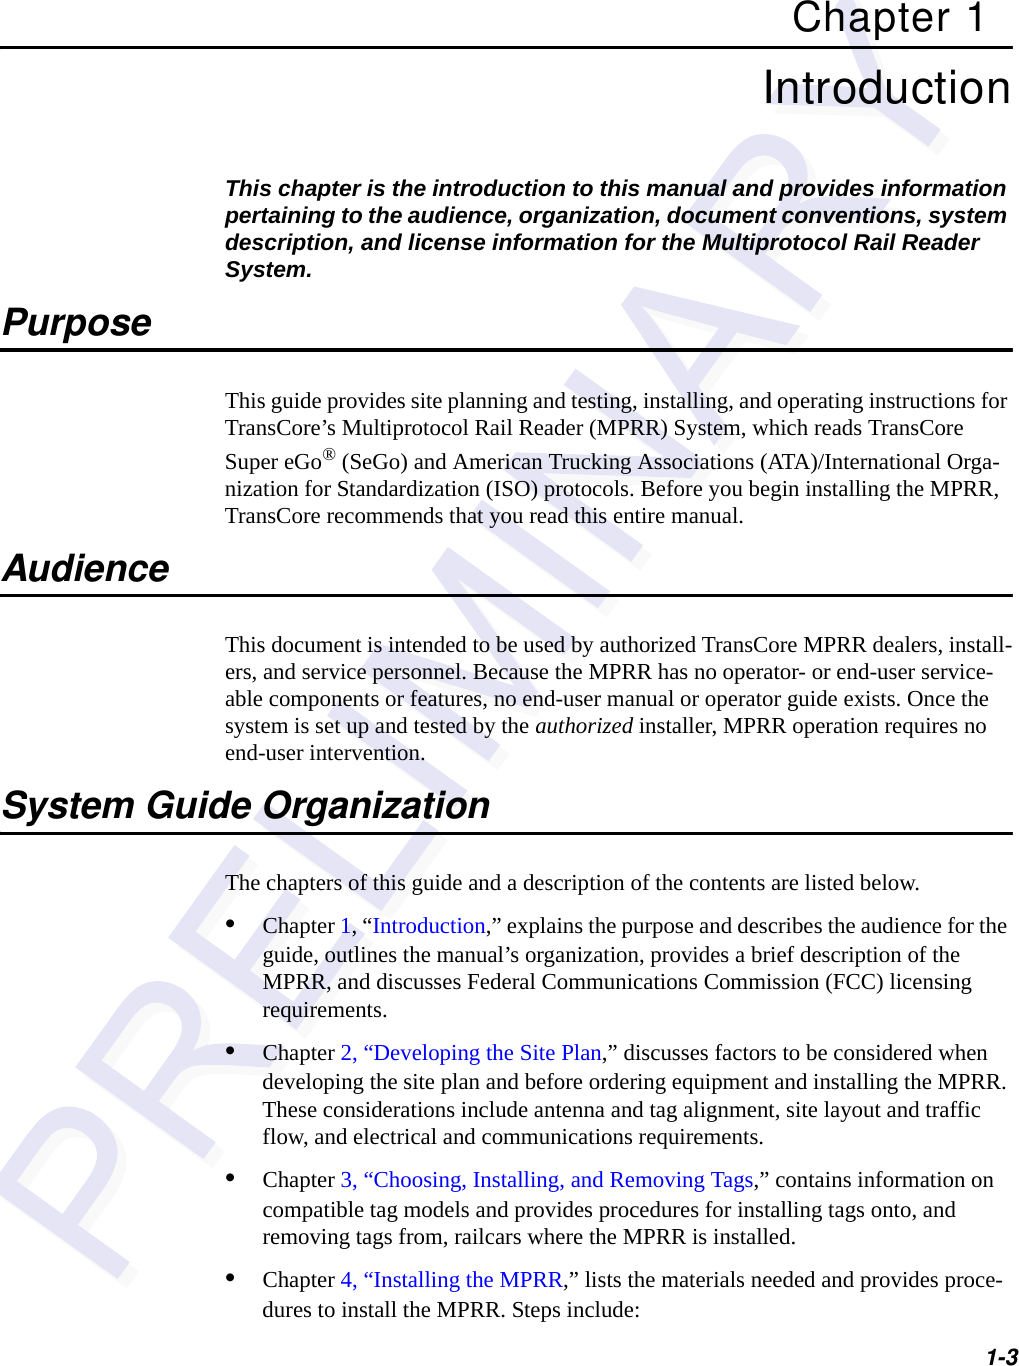 1-3Chapter 1IntroductionThis chapter is the introduction to this manual and provides information pertaining to the audience, organization, document conventions, system description, and license information for the Multiprotocol Rail Reader System. PurposeThis guide provides site planning and testing, installing, and operating instructions for TransCore’s Multiprotocol Rail Reader (MPRR) System, which reads TransCore Super eGo® (SeGo) and American Trucking Associations (ATA)/International Orga-nization for Standardization (ISO) protocols. Before you begin installing the MPRR, TransCore recommends that you read this entire manual.AudienceThis document is intended to be used by authorized TransCore MPRR dealers, install-ers, and service personnel. Because the MPRR has no operator- or end-user service-able components or features, no end-user manual or operator guide exists. Once the system is set up and tested by the authorized installer, MPRR operation requires no end-user intervention.System Guide OrganizationThe chapters of this guide and a description of the contents are listed below. •Chapter 1, “Introduction,” explains the purpose and describes the audience for the guide, outlines the manual’s organization, provides a brief description of the MPRR, and discusses Federal Communications Commission (FCC) licensing requirements.•Chapter 2, “Developing the Site Plan,” discusses factors to be considered when developing the site plan and before ordering equipment and installing the MPRR. These considerations include antenna and tag alignment, site layout and traffic flow, and electrical and communications requirements.•Chapter 3, “Choosing, Installing, and Removing Tags,” contains information on compatible tag models and provides procedures for installing tags onto, and removing tags from, railcars where the MPRR is installed.•Chapter 4, “Installing the MPRR,” lists the materials needed and provides proce-dures to install the MPRR. Steps include: